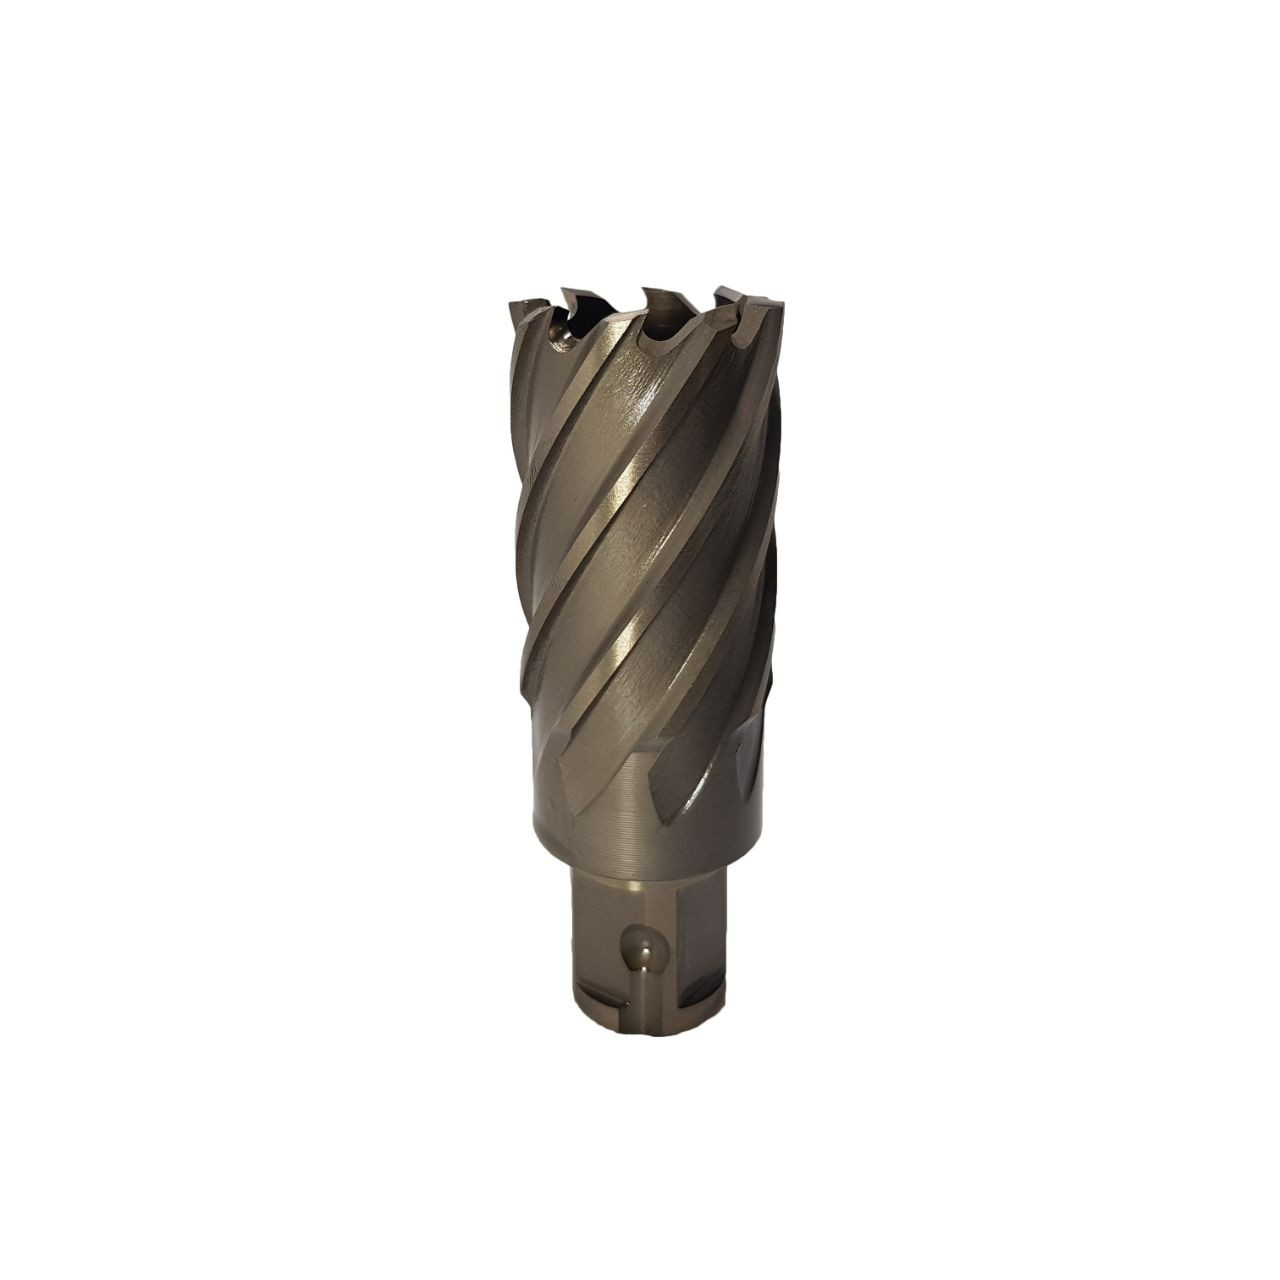 28 X 50 HSS-Co Excision Core Drill